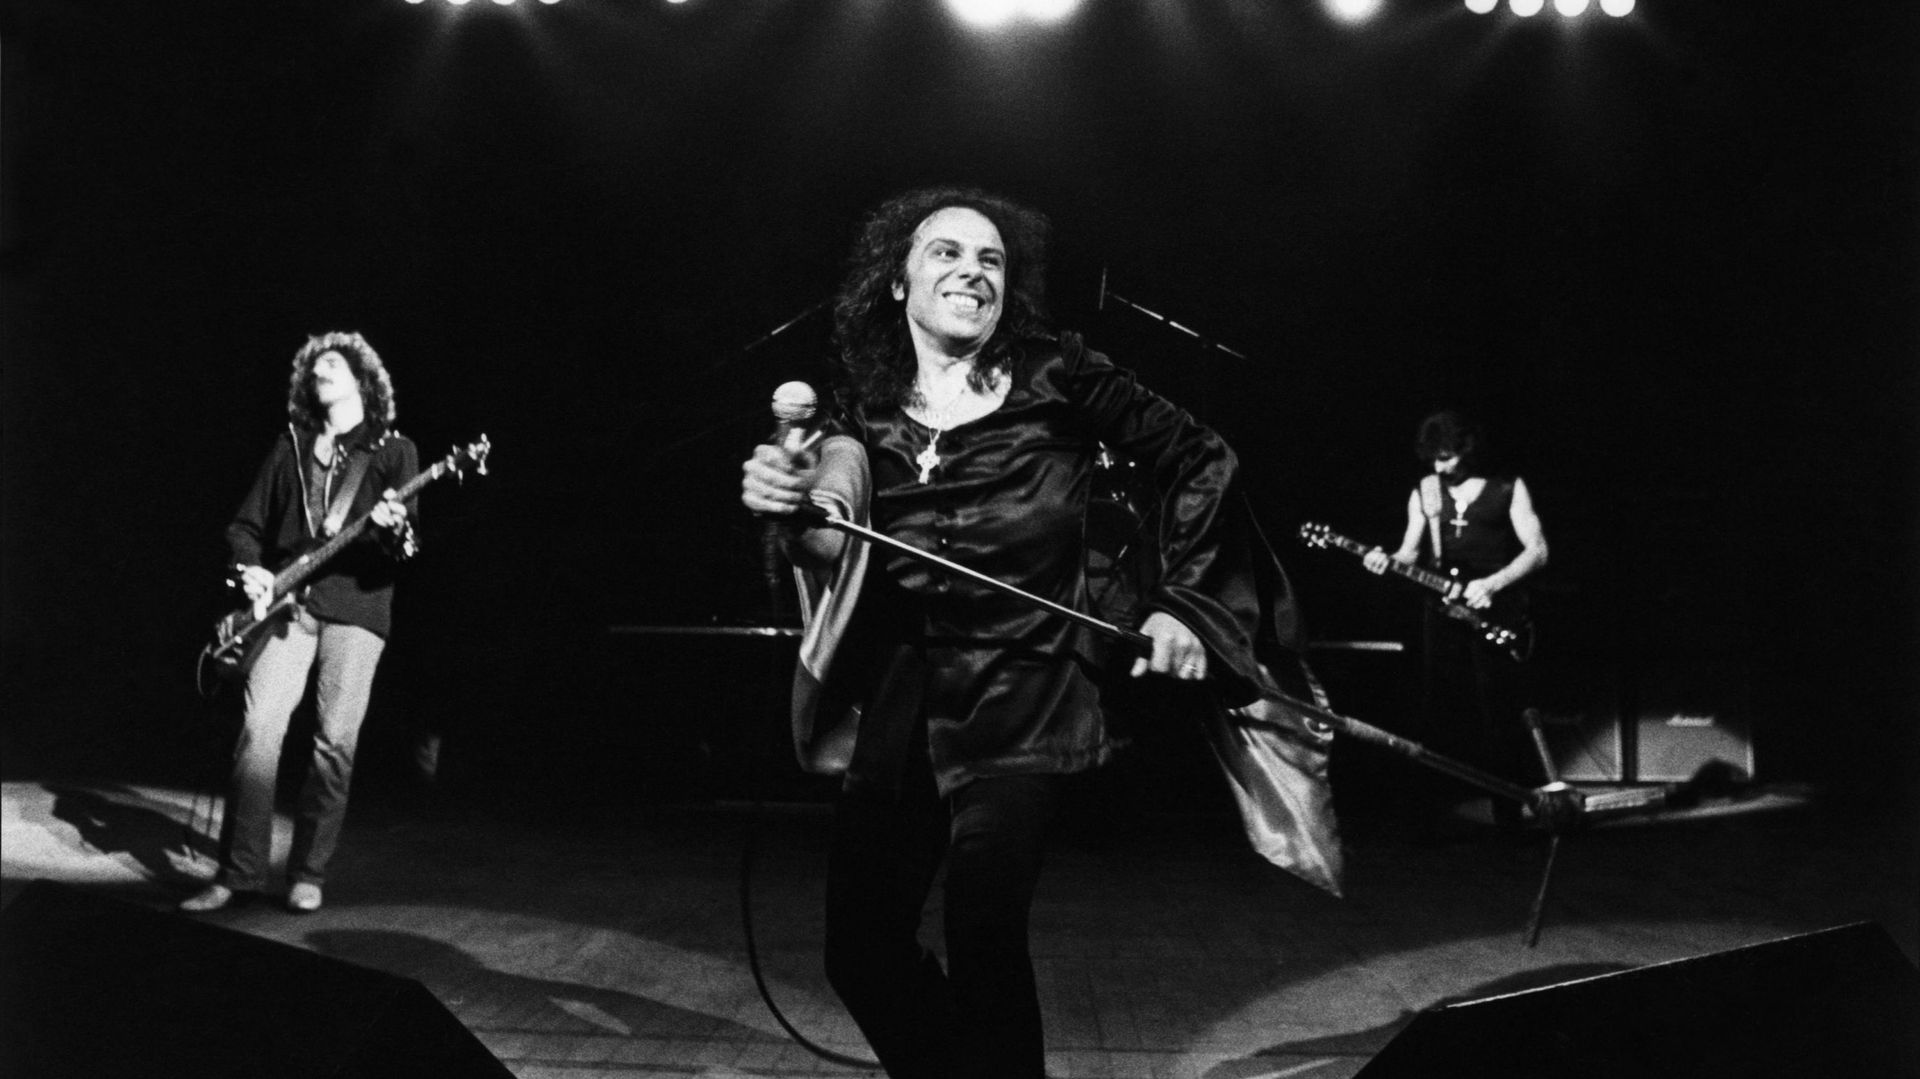 UNITED KINGDOM - JUNE 25: Photo of Tony IOMMI and Geezer BUTLER and Ronnie DIO and BLACK SABBATH; L-R: Geezer Butler, Ronnie Dio, Tony Iommi performing live onstage (Photo by Fin Costello/Redferns)